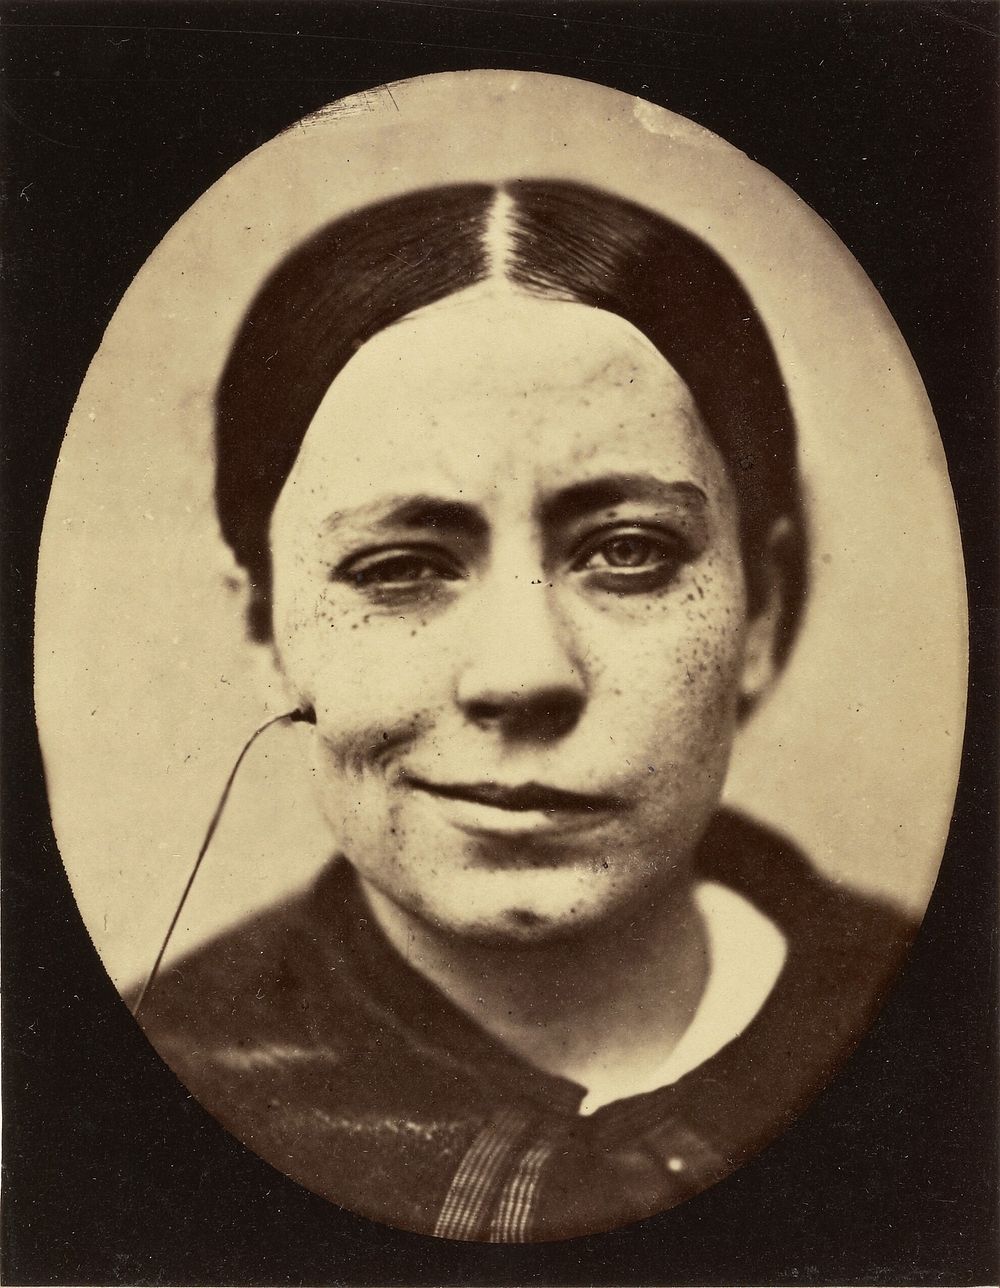 Electro-Physiologie Photographique (Portrait of a Woman), Fig. 35 by Guillaume Benjamin Duchenne and Adrien Alban Tournachon